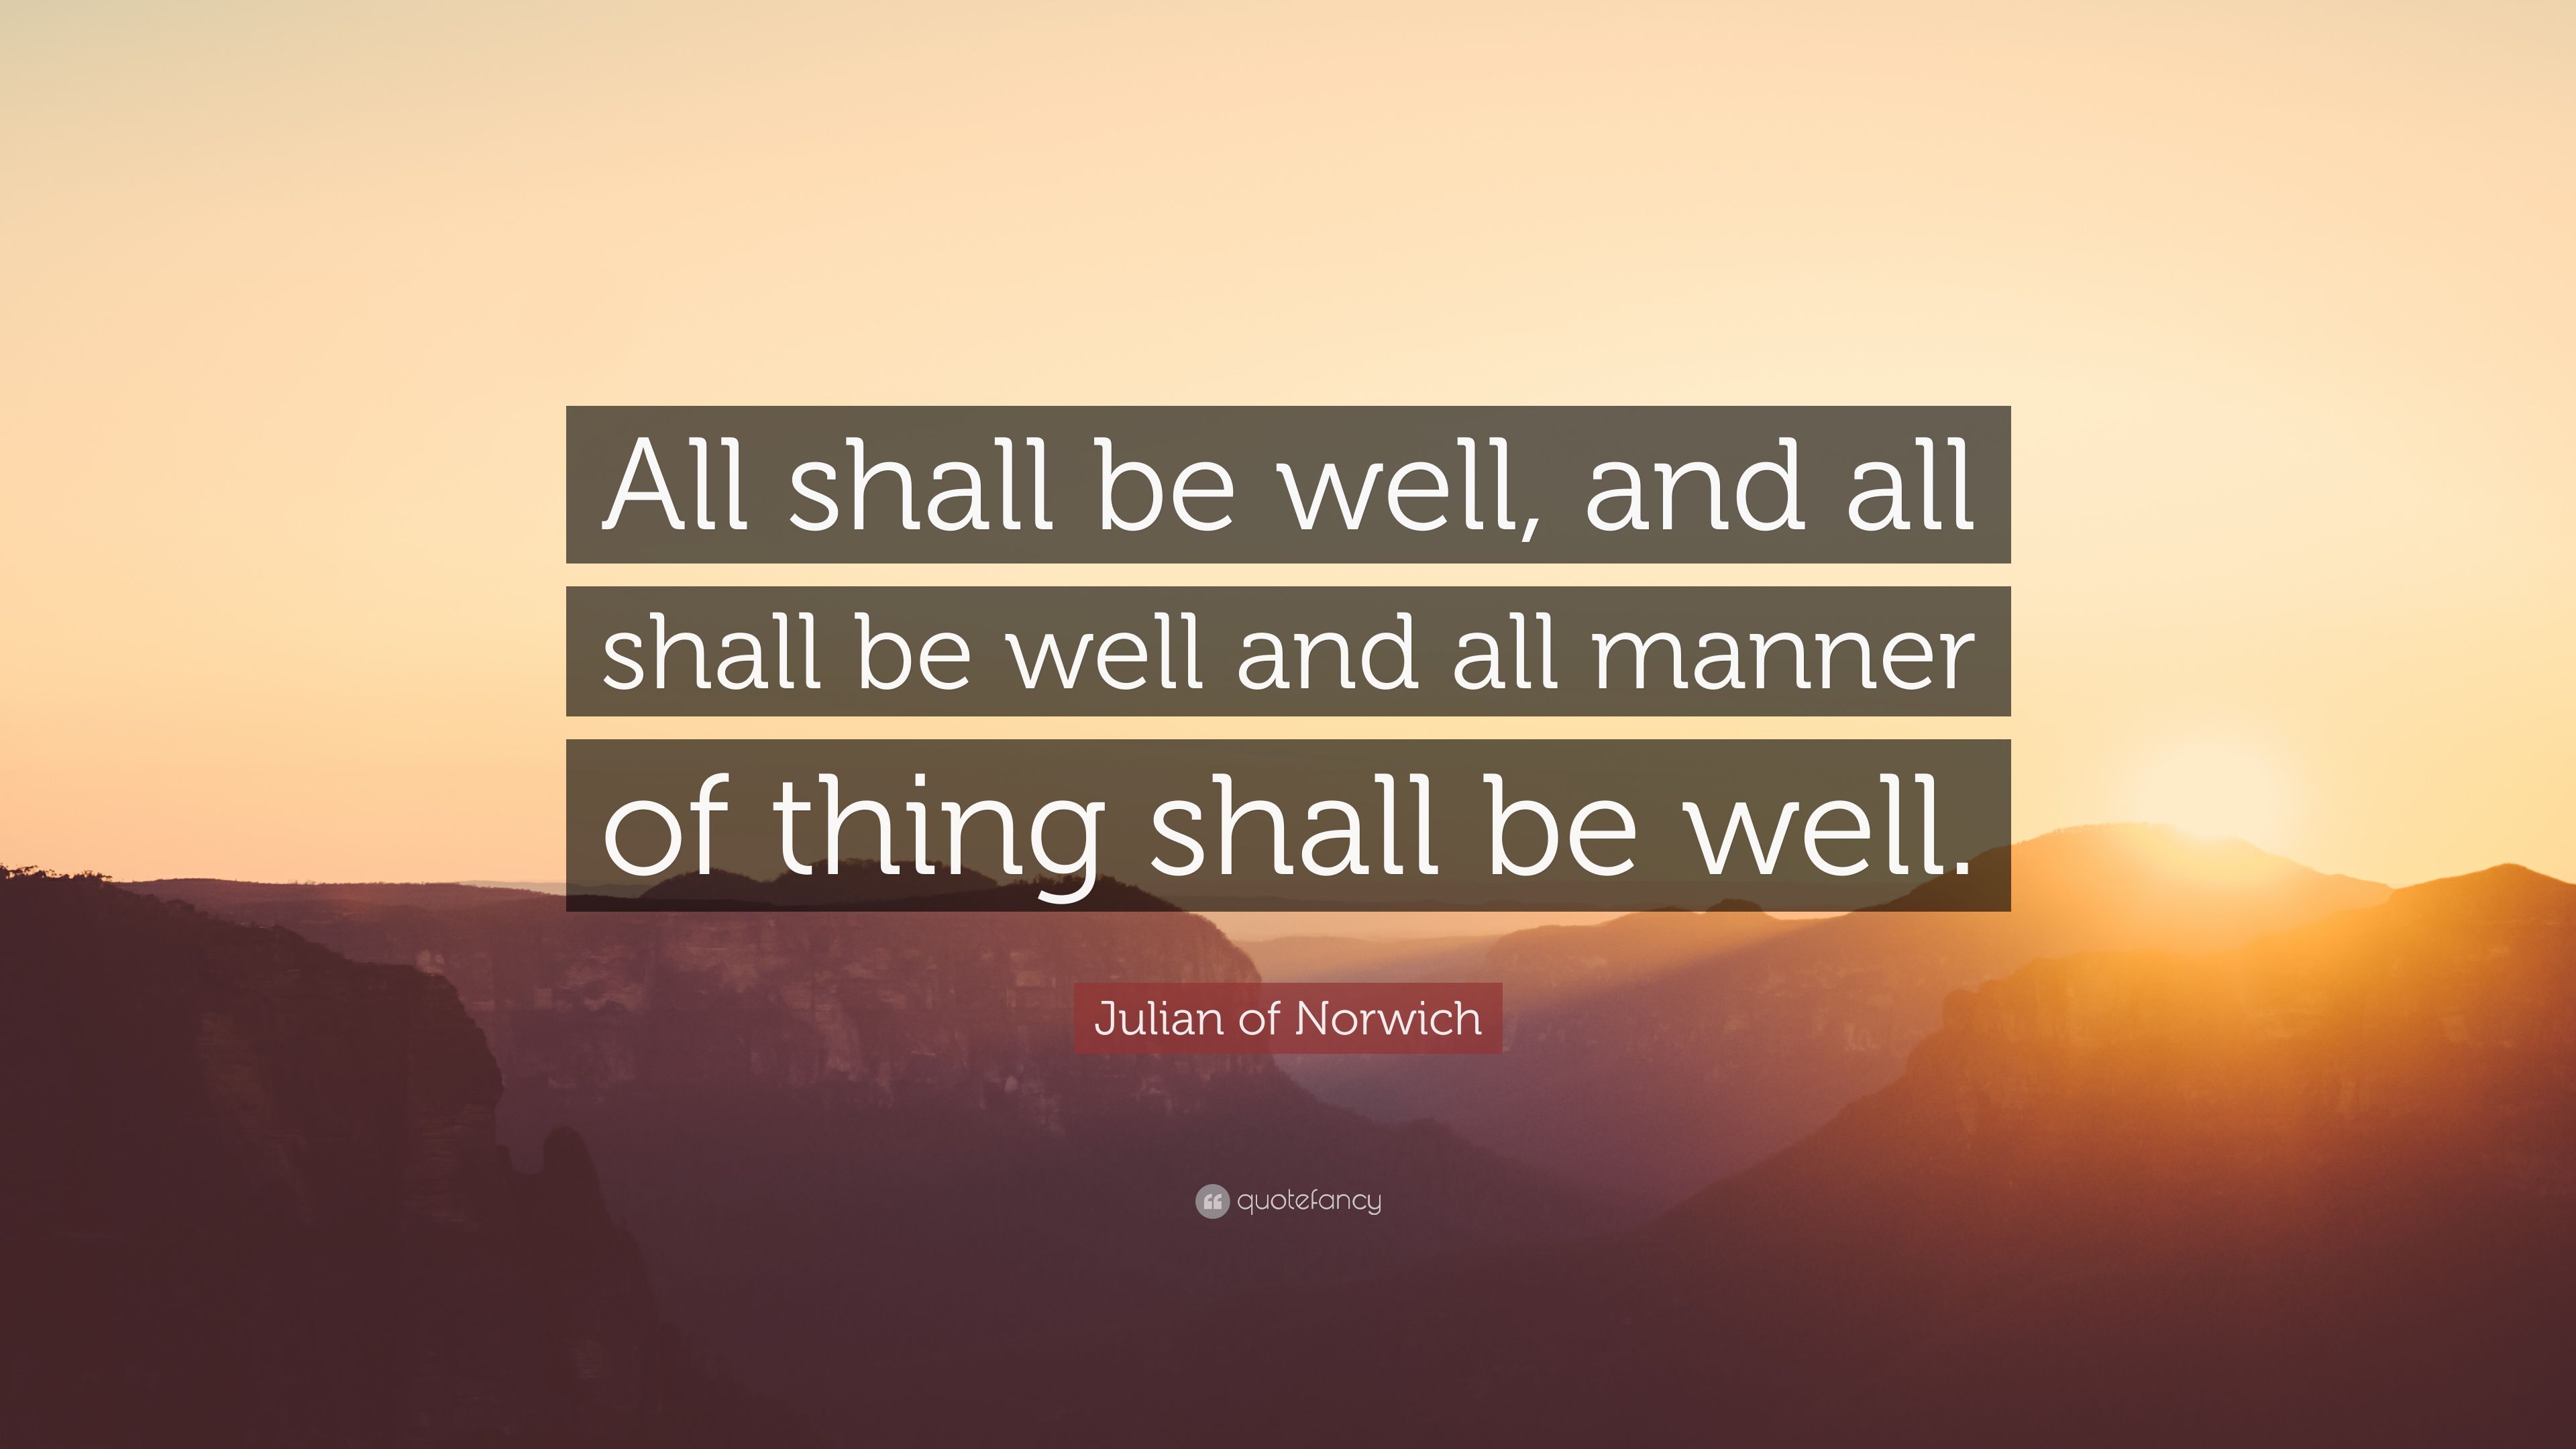 Julian of Norwich Quote: “All shall be well, and all shall be well